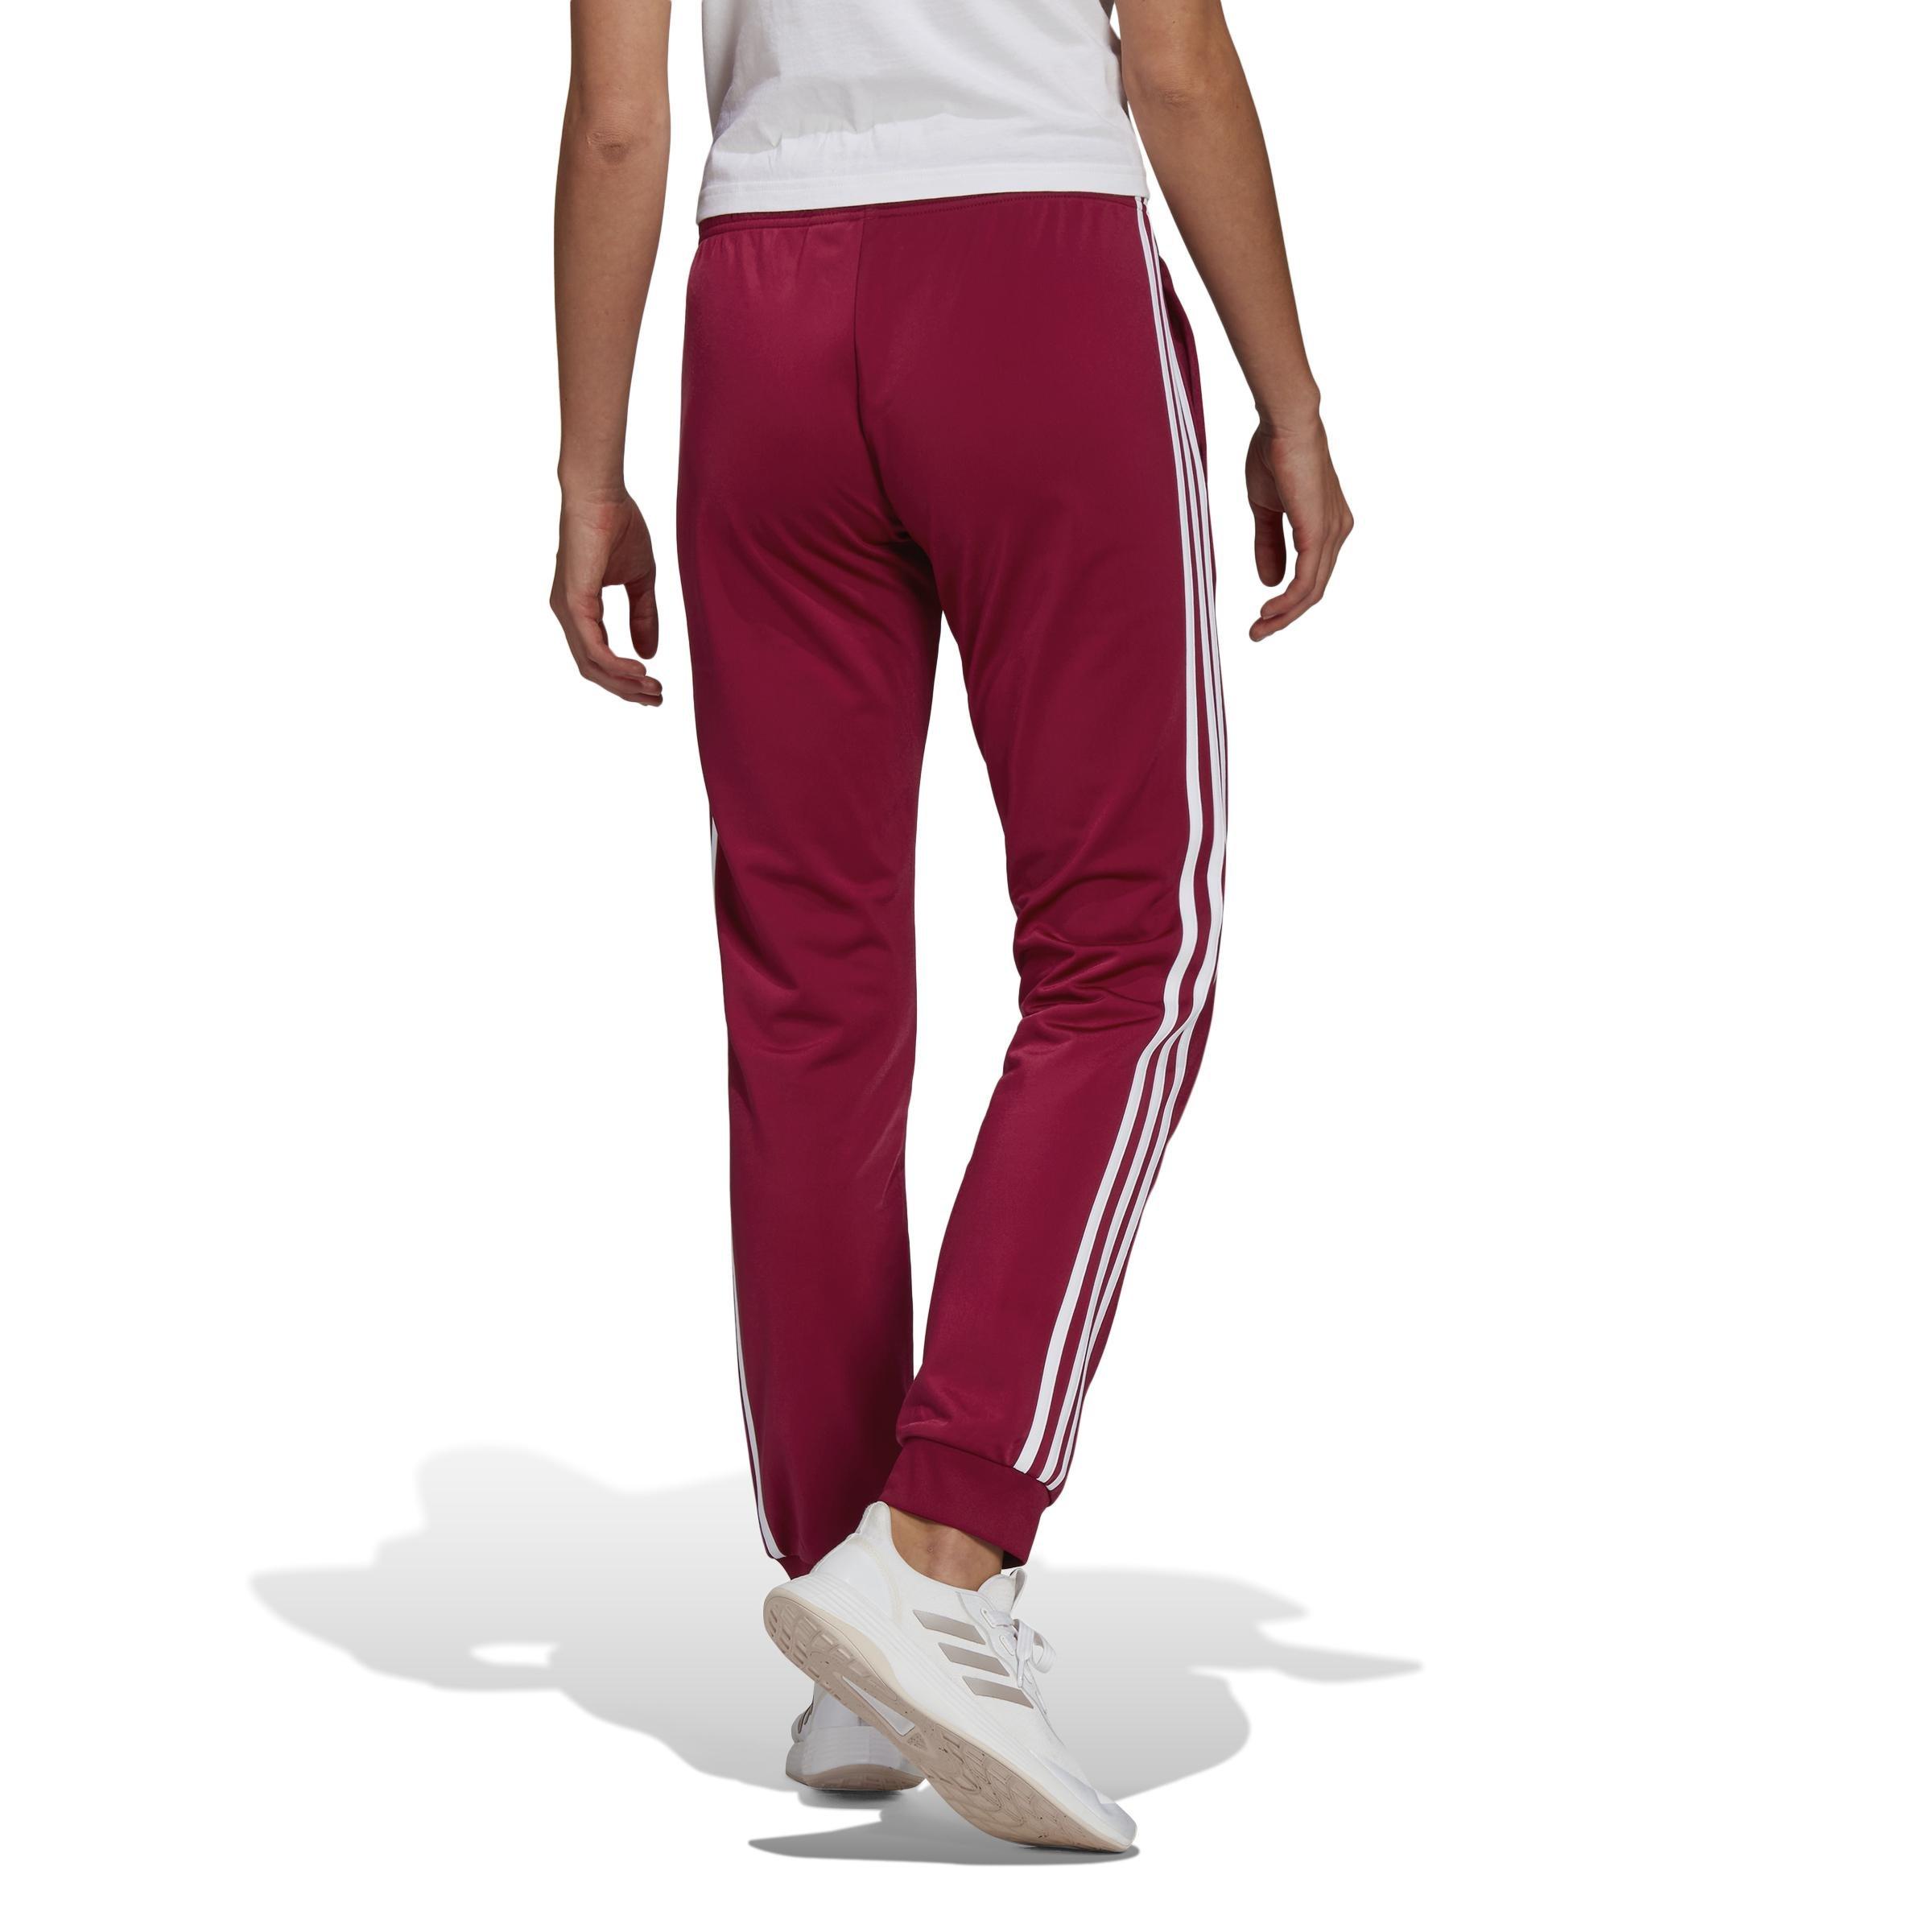 Shop Primegreen Essentials Warm-Up Slim Tapered 3-Stripes Tracksuit Bottoms  by adidas online in Qatar